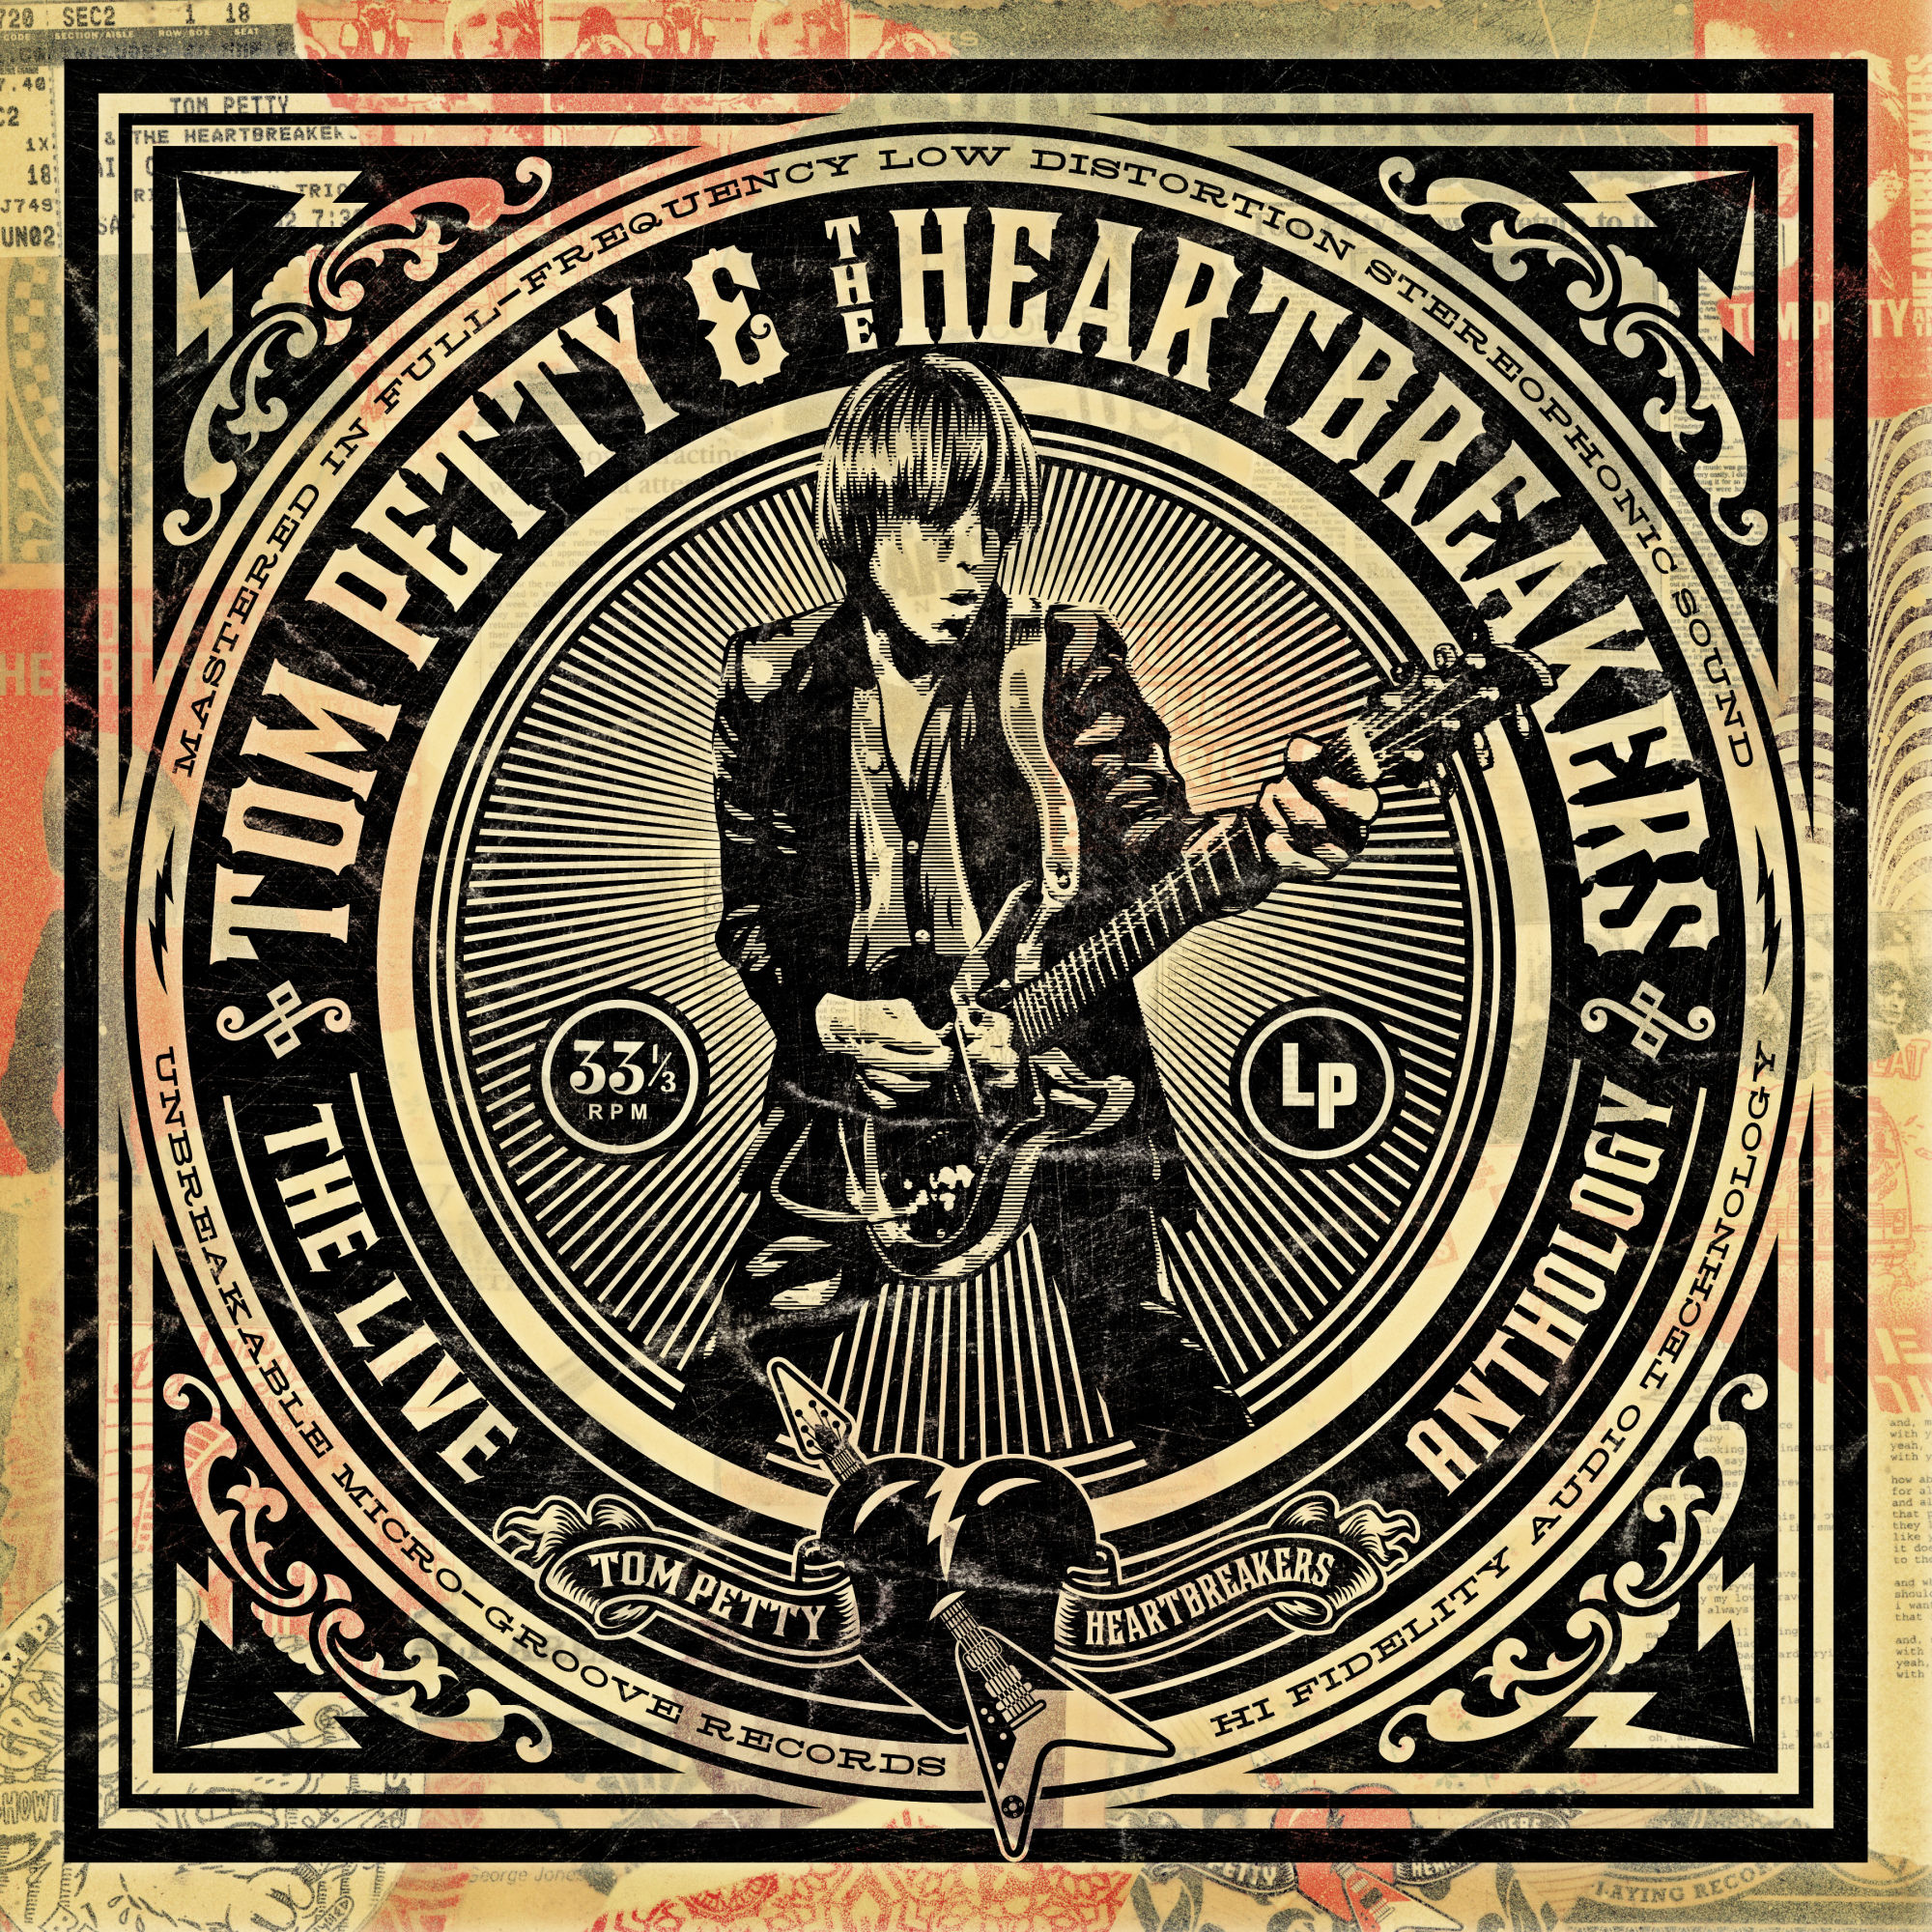 Tom Petty & The Heartbreakers: Live At The Fillmore (1997)